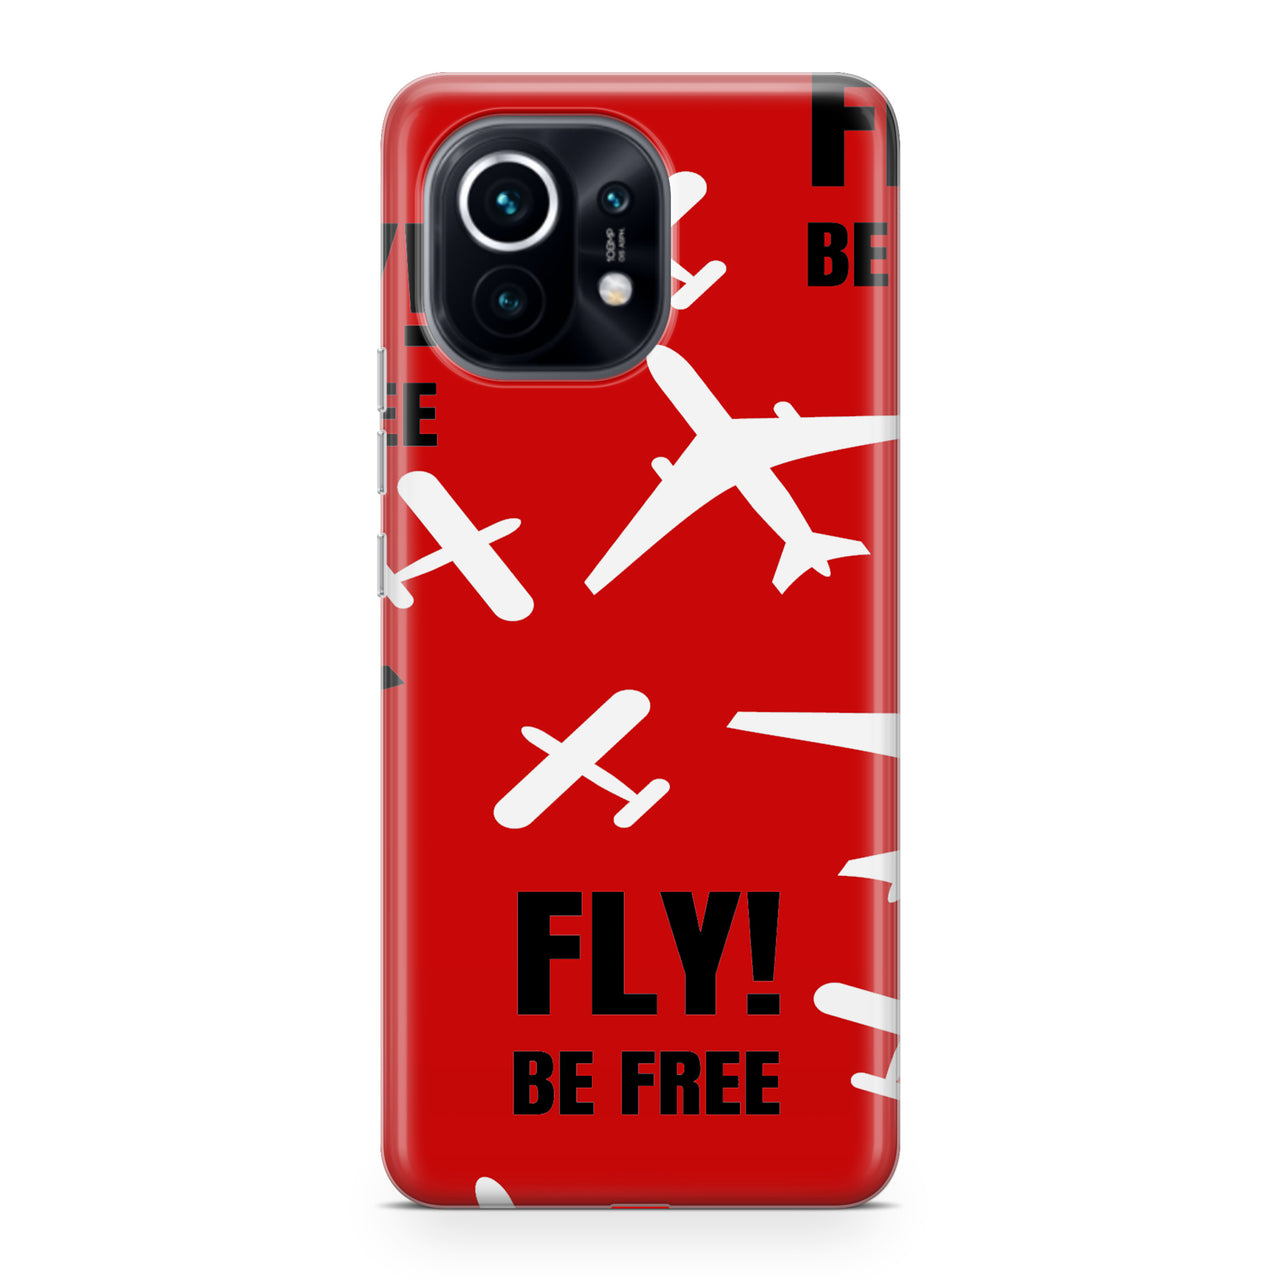 Fly Be Free Red Designed Xiaomi Cases